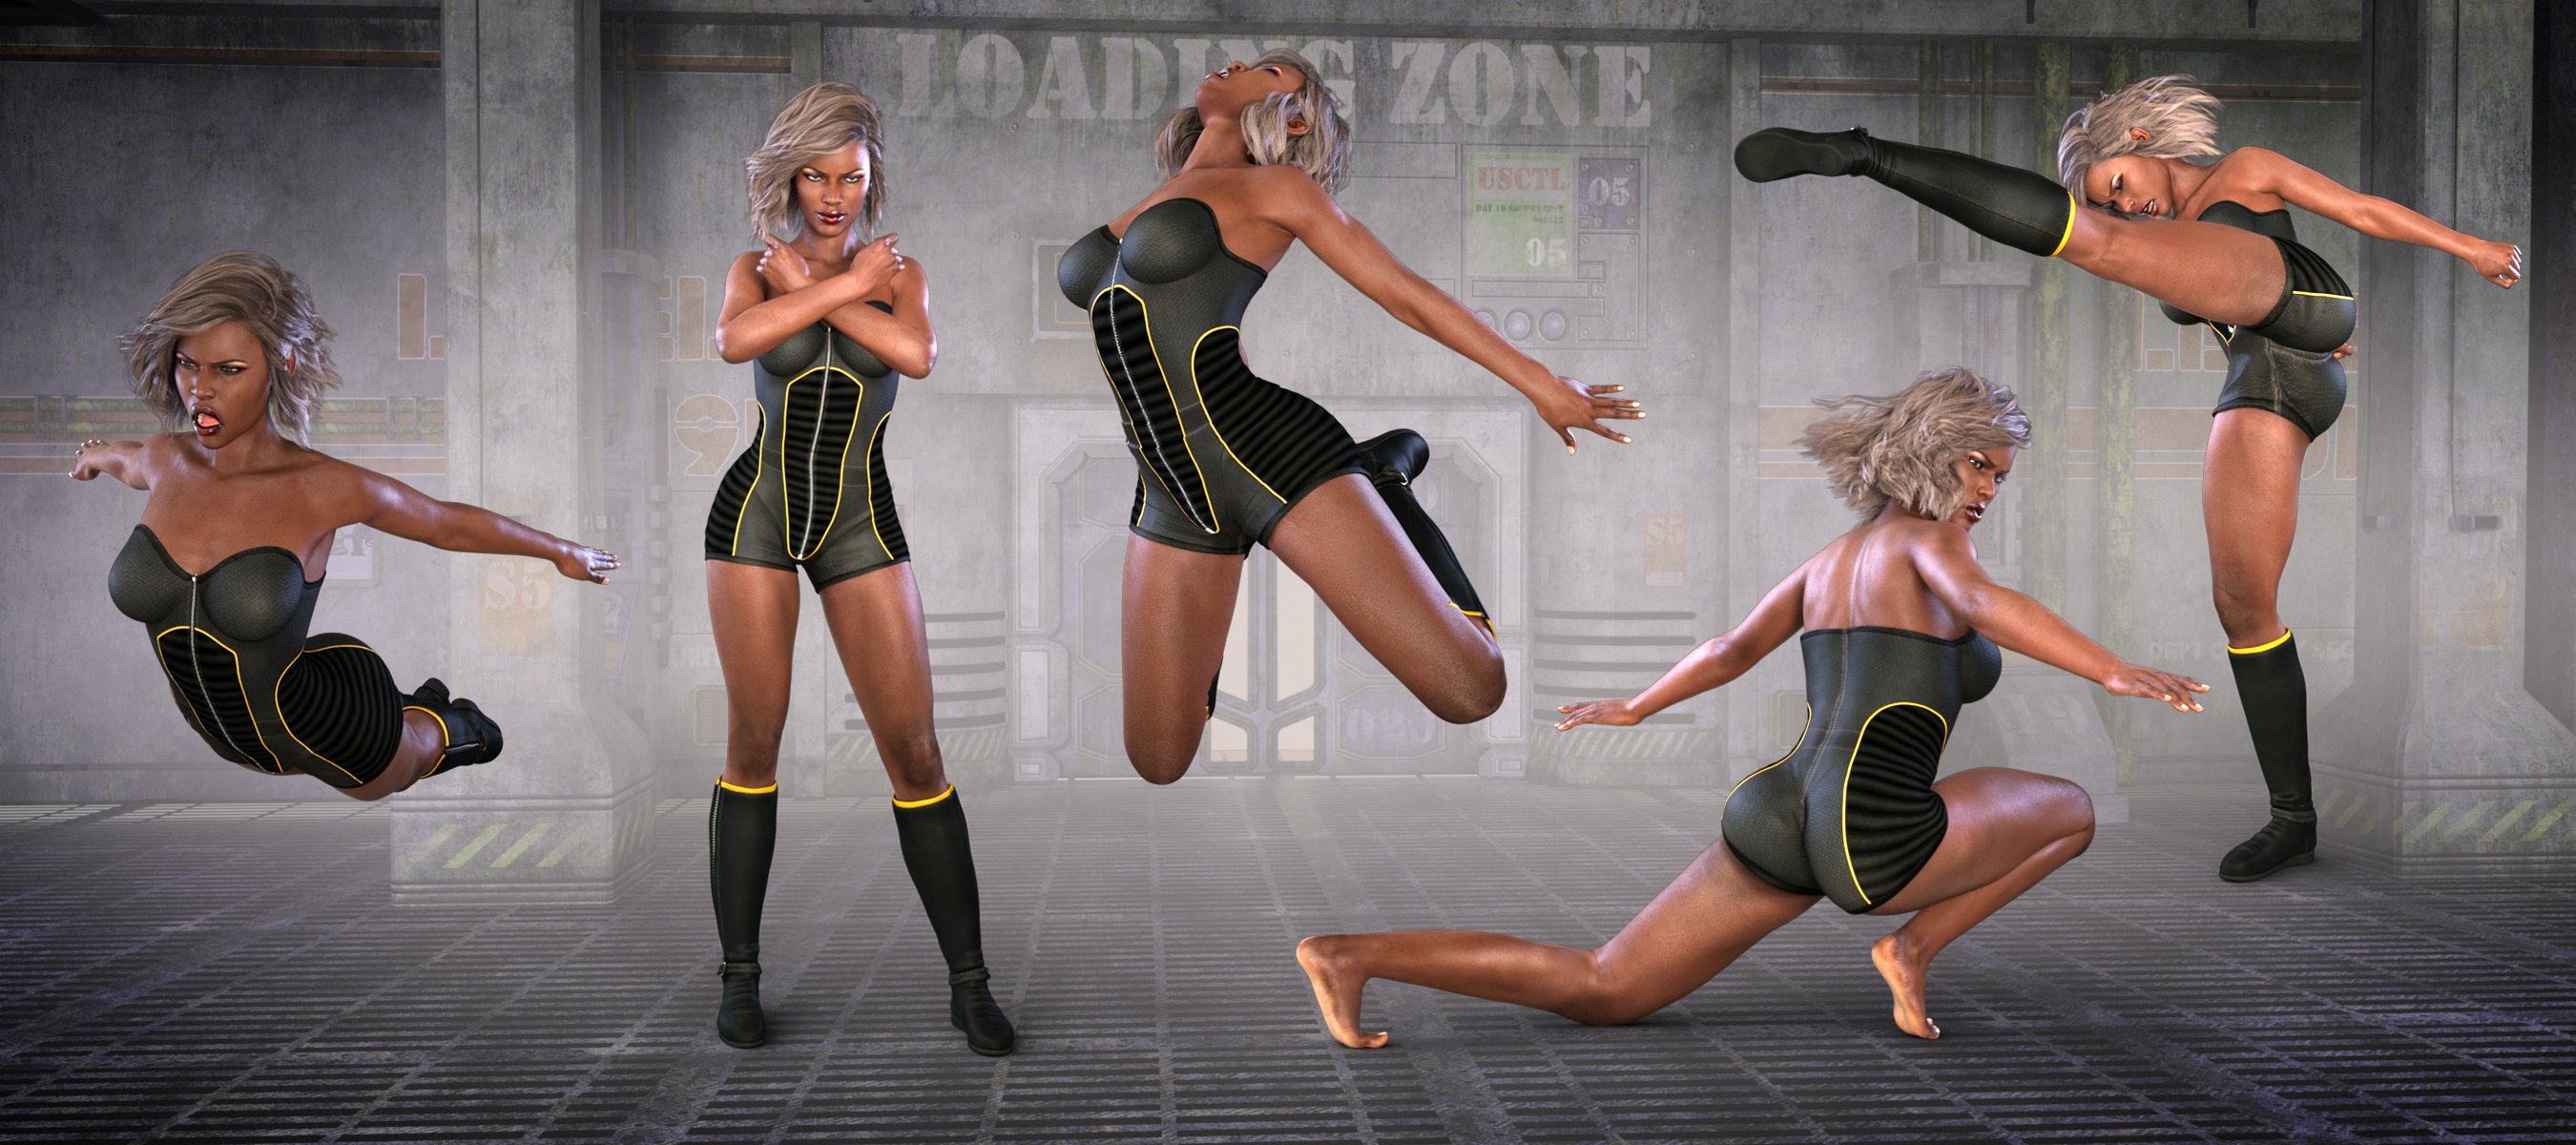 Z Real Action - Poses and Expressions for Genesis 8 Female by: Zeddicuss, 3D Models by Daz 3D